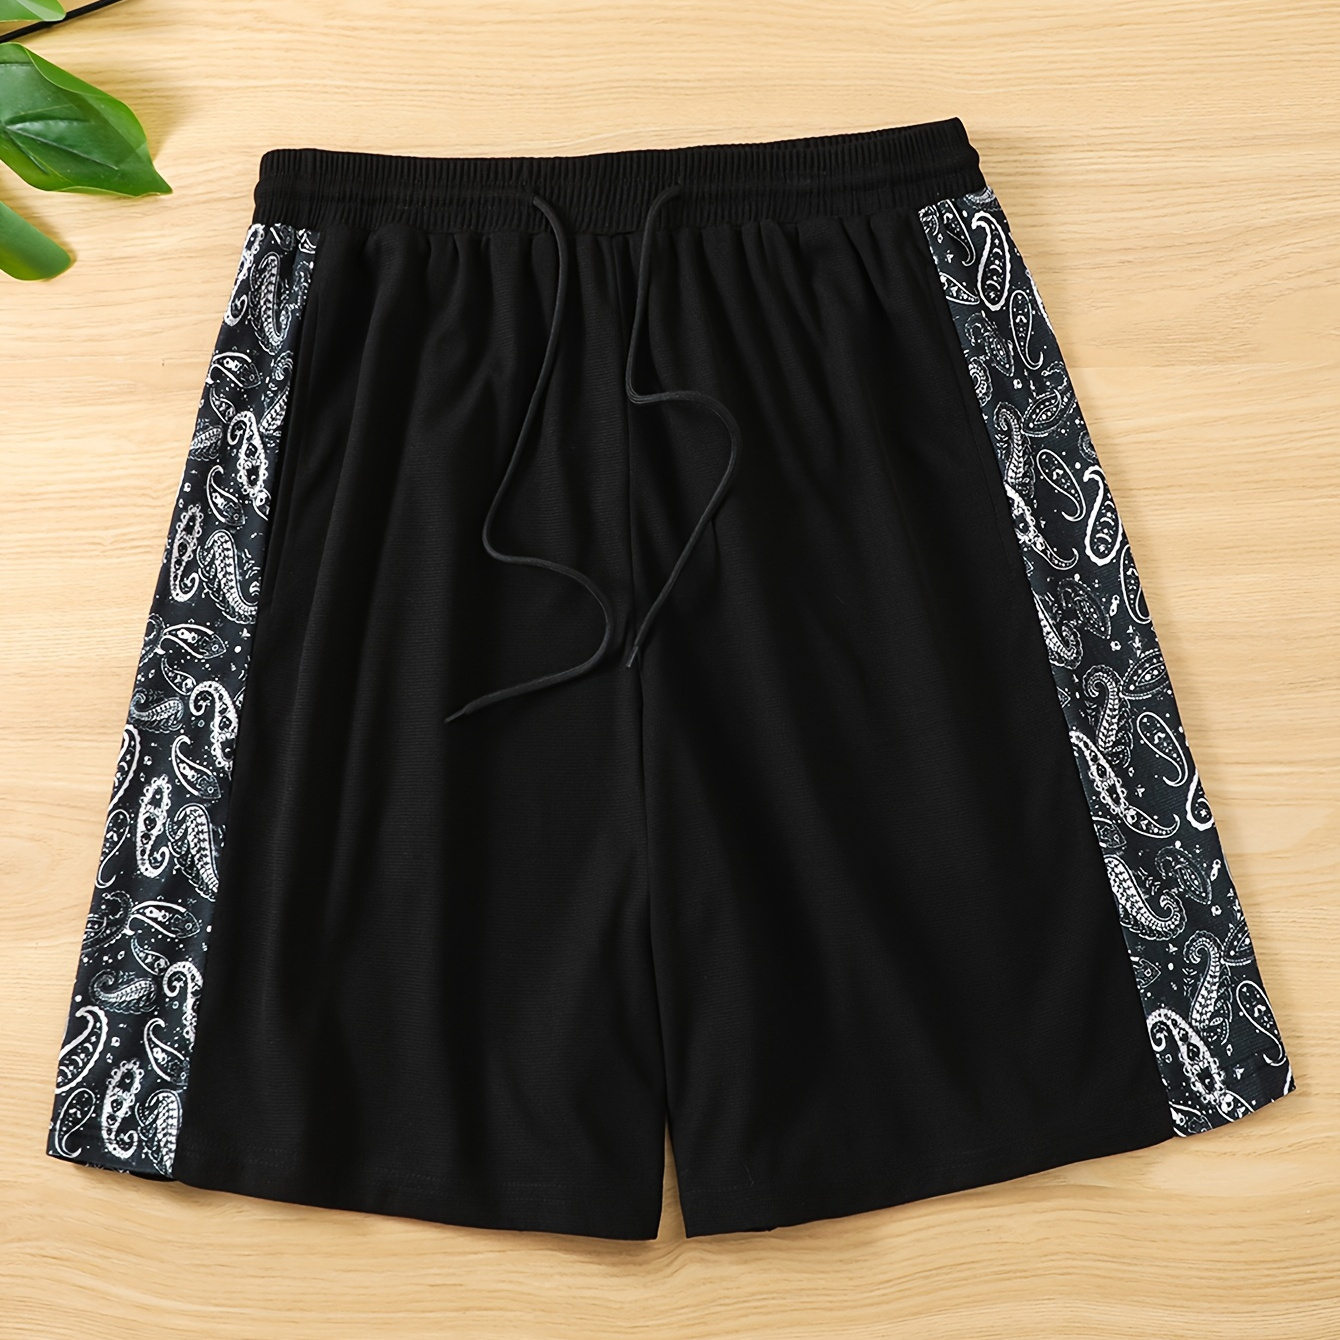 

Paisley Pattern Beach Shorts, Men's Casual Stretch Quick Drying Waist Drawstring Shorts For Summer